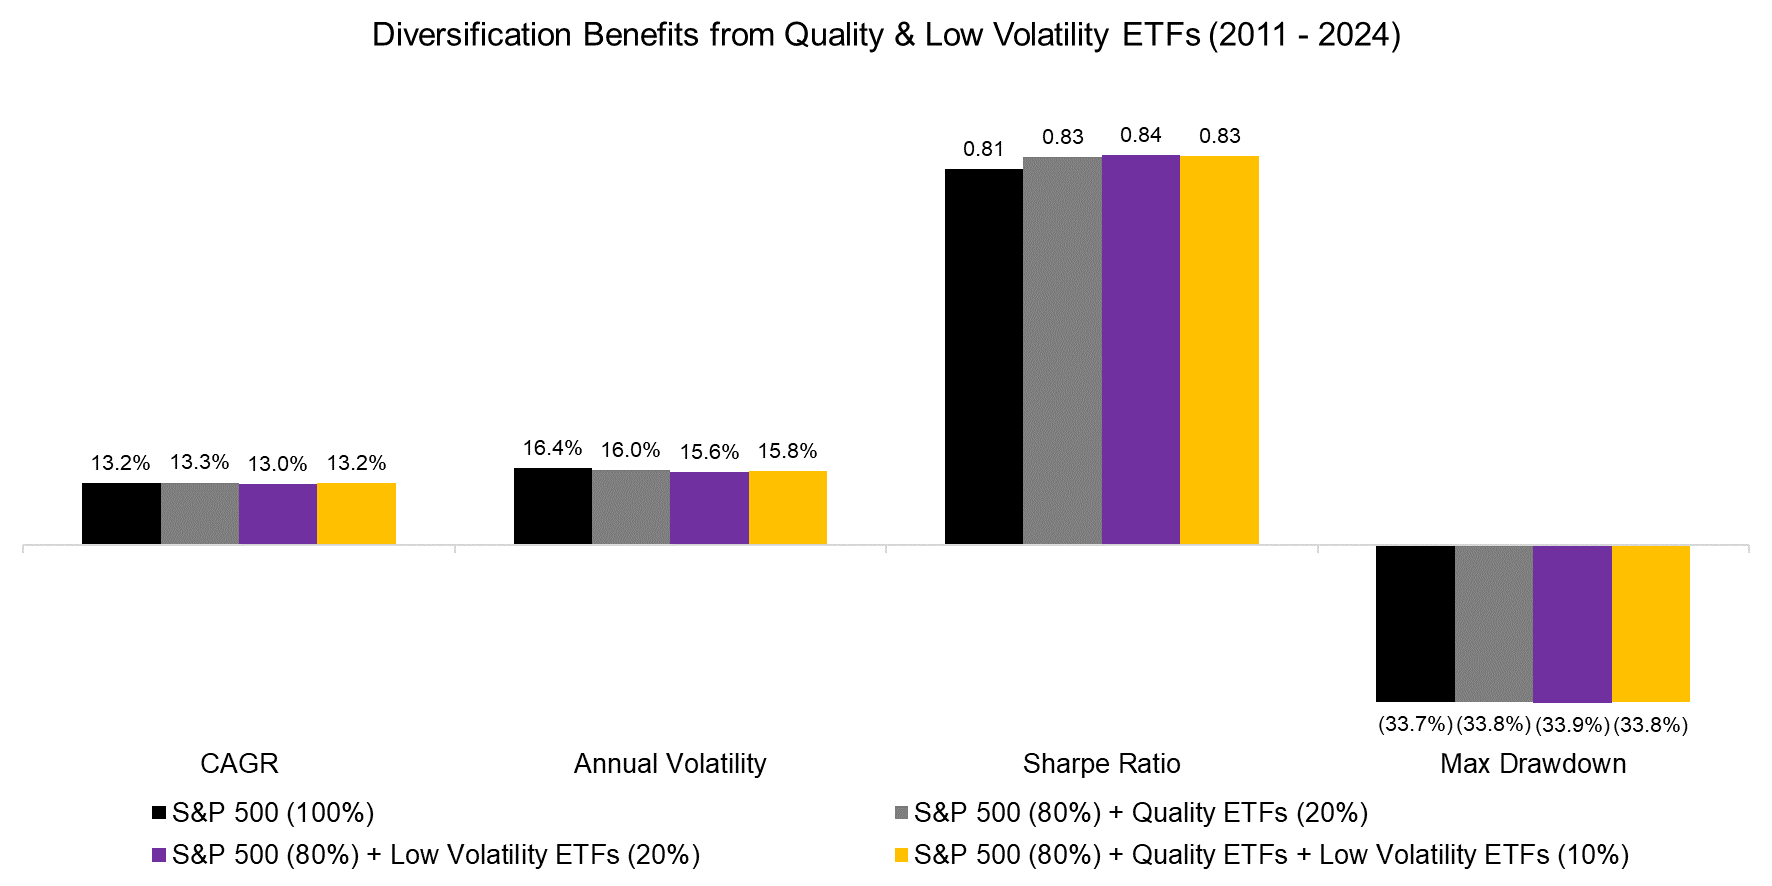 Diversification Benefits from Quality & Low Volatility ETFs (2011 - 2024)